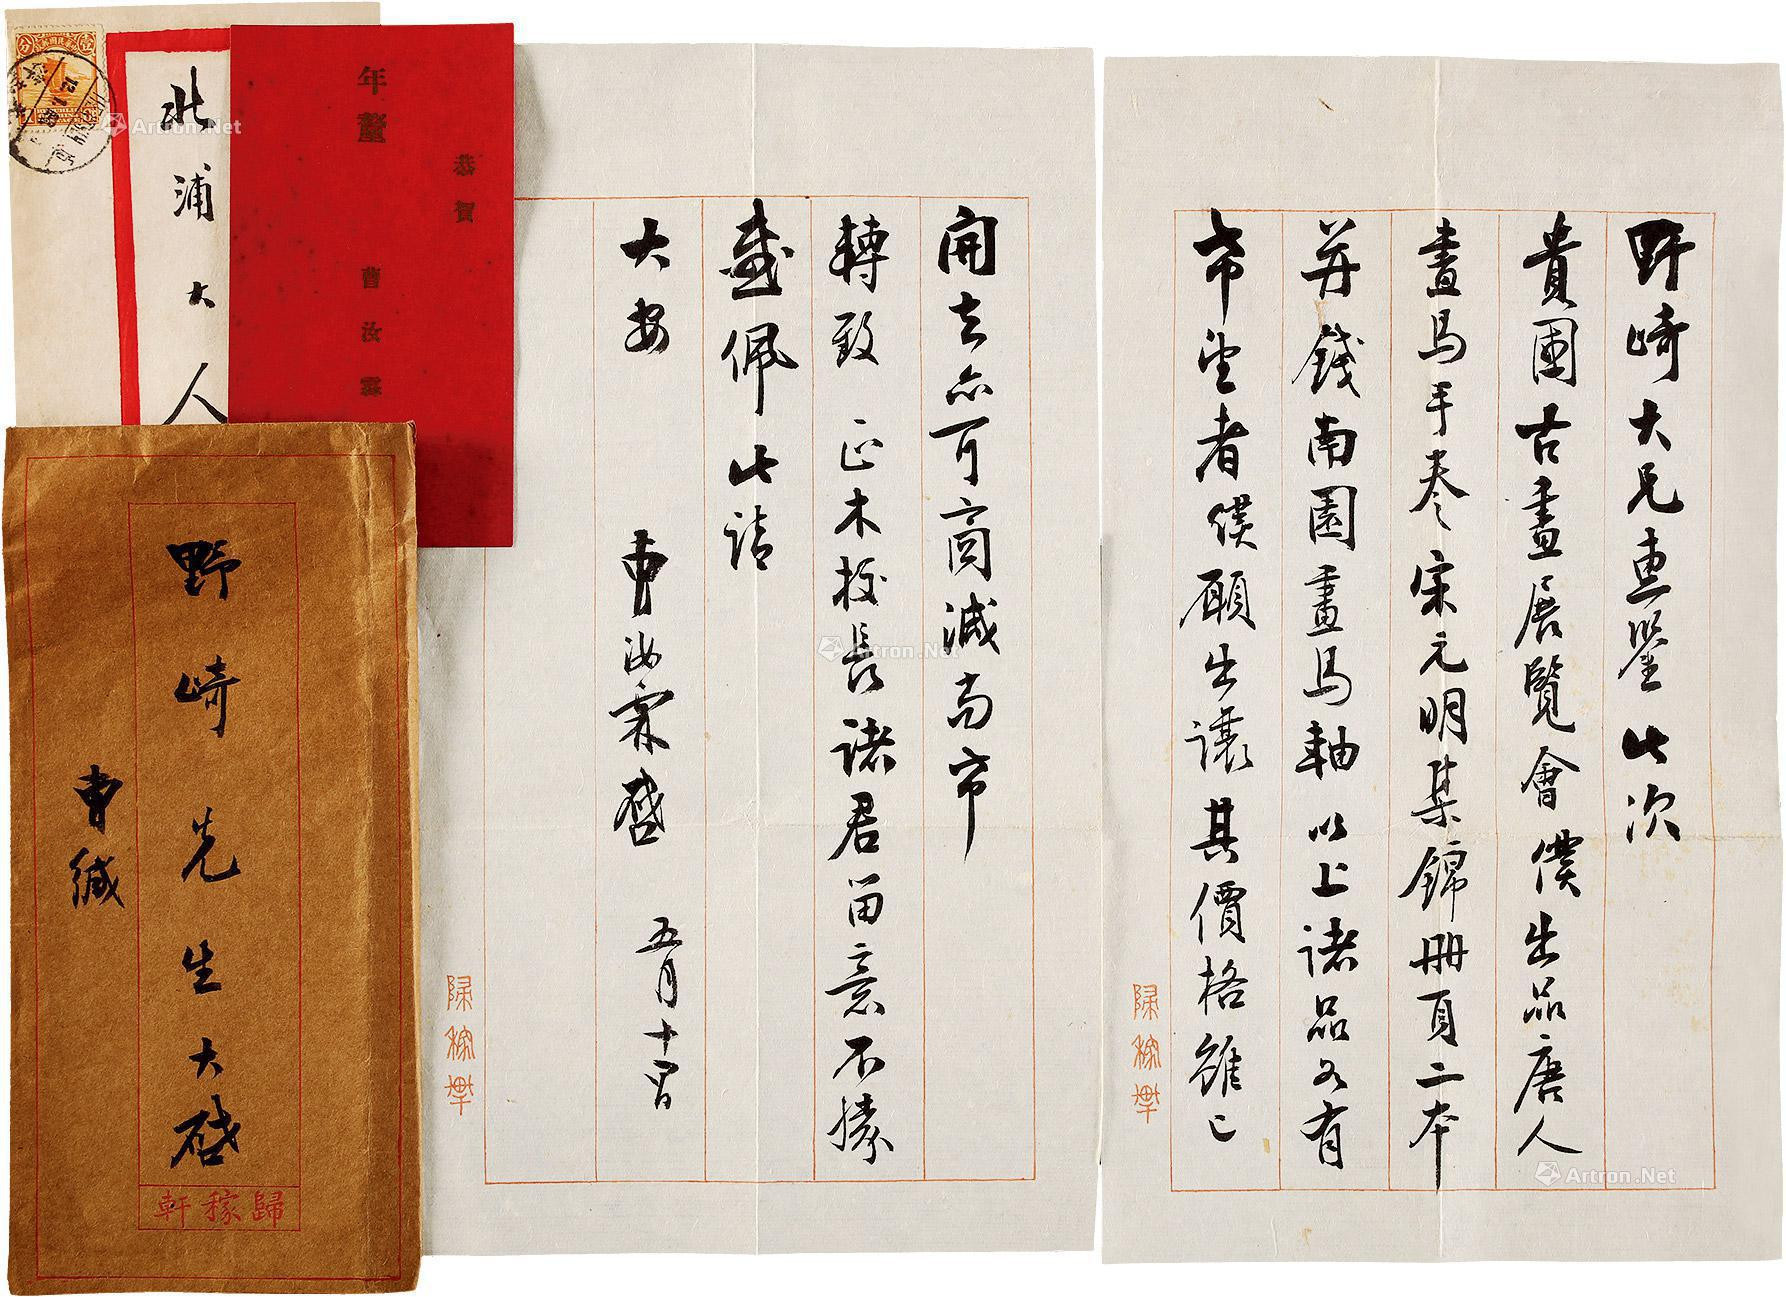 Group of letters and greeting card invitation of Cao Rulin， with original covers